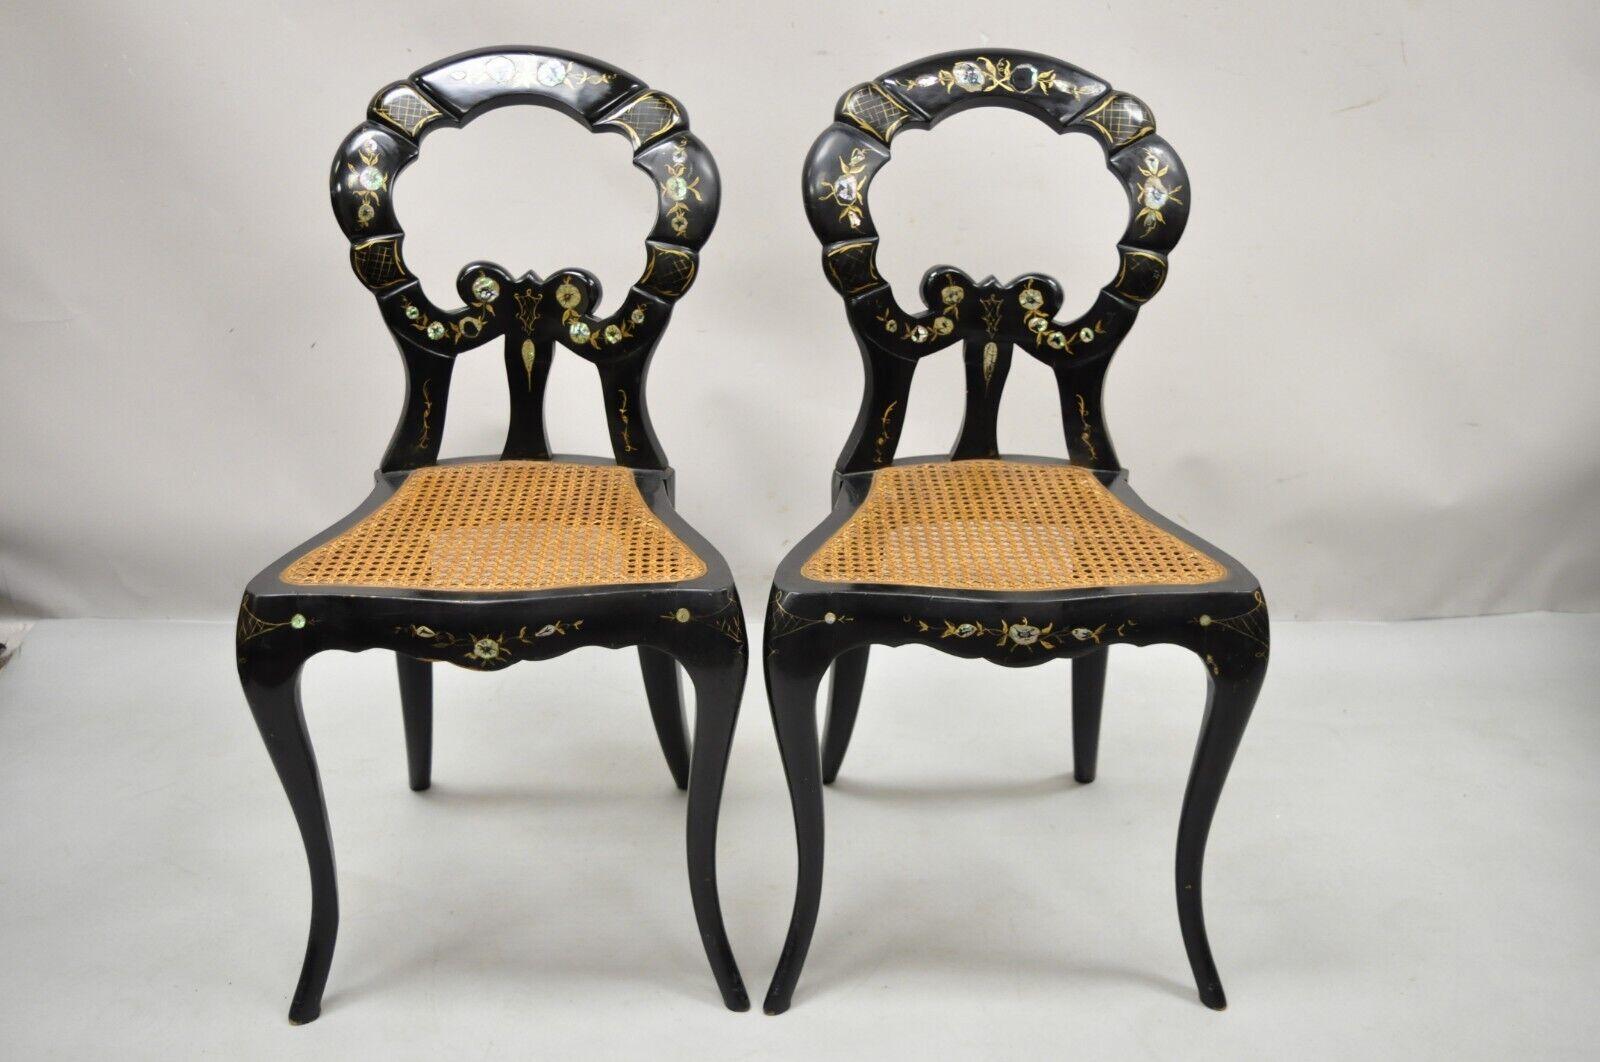 Antique English Regency Mother of Pearl Inlay Black Ebonized Side Chair - a Pair. Item features black lacquer finish, mother of pearl inlay, saber legs, cane seats, solid wood frame, very nice antique pair. Circa 19th Century. Measurements: 33